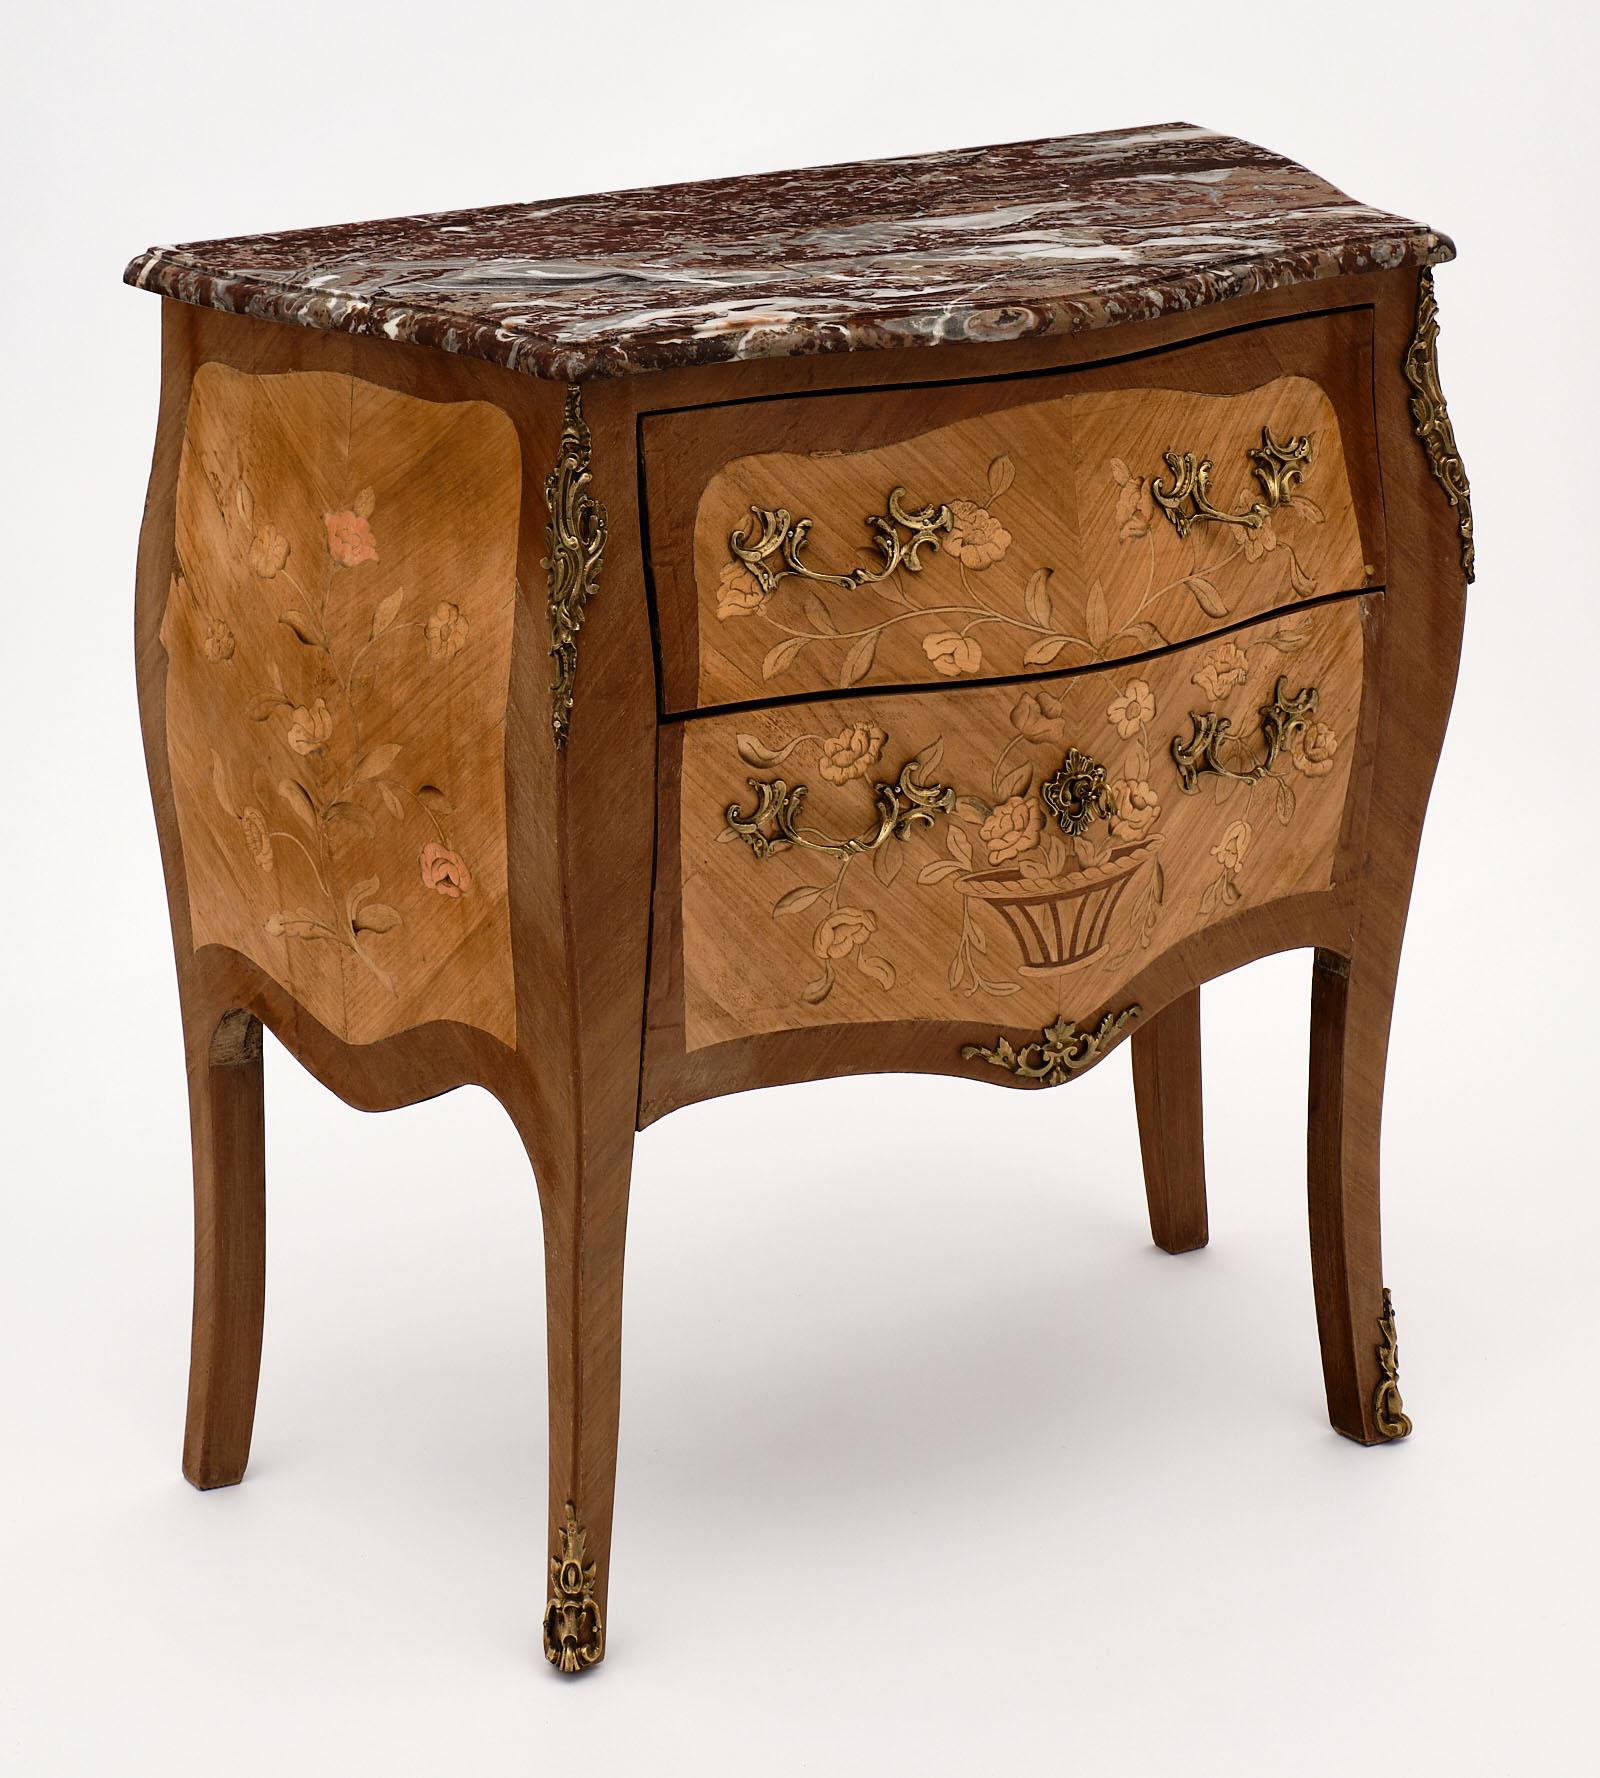 French Louis XV style chest with rouge Royal marble top and serpentine shape. This piece features rosewood and tinted rosewood in a floral marquetry throughout. The rogue royal marble top has beautiful color and veining. The finely cast gilt bronze